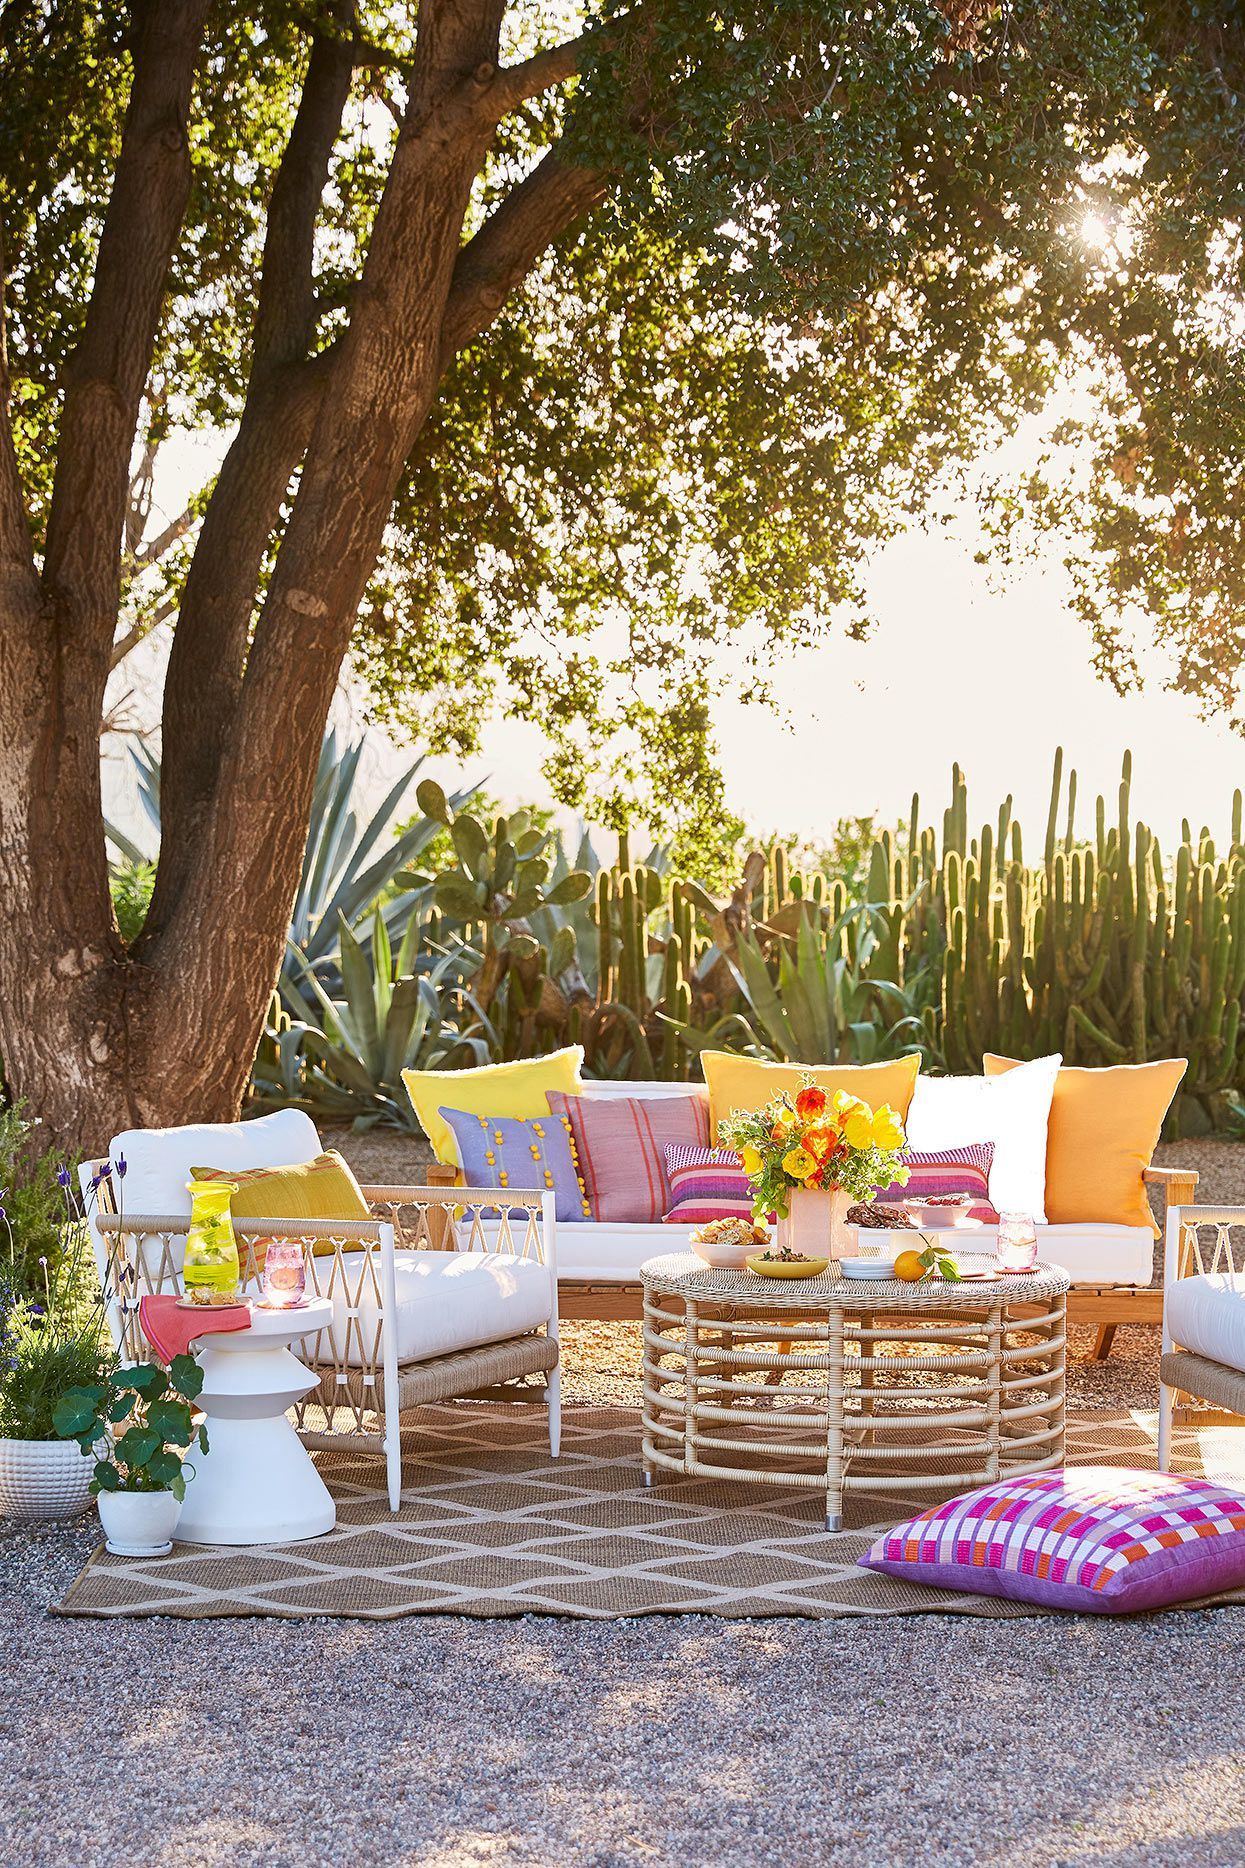 8 Tips For Buying Patio Furniture That Suits Your Outdoor Space Throughout Backyard Porch Garden Patio Furniture Set (View 15 of 15)